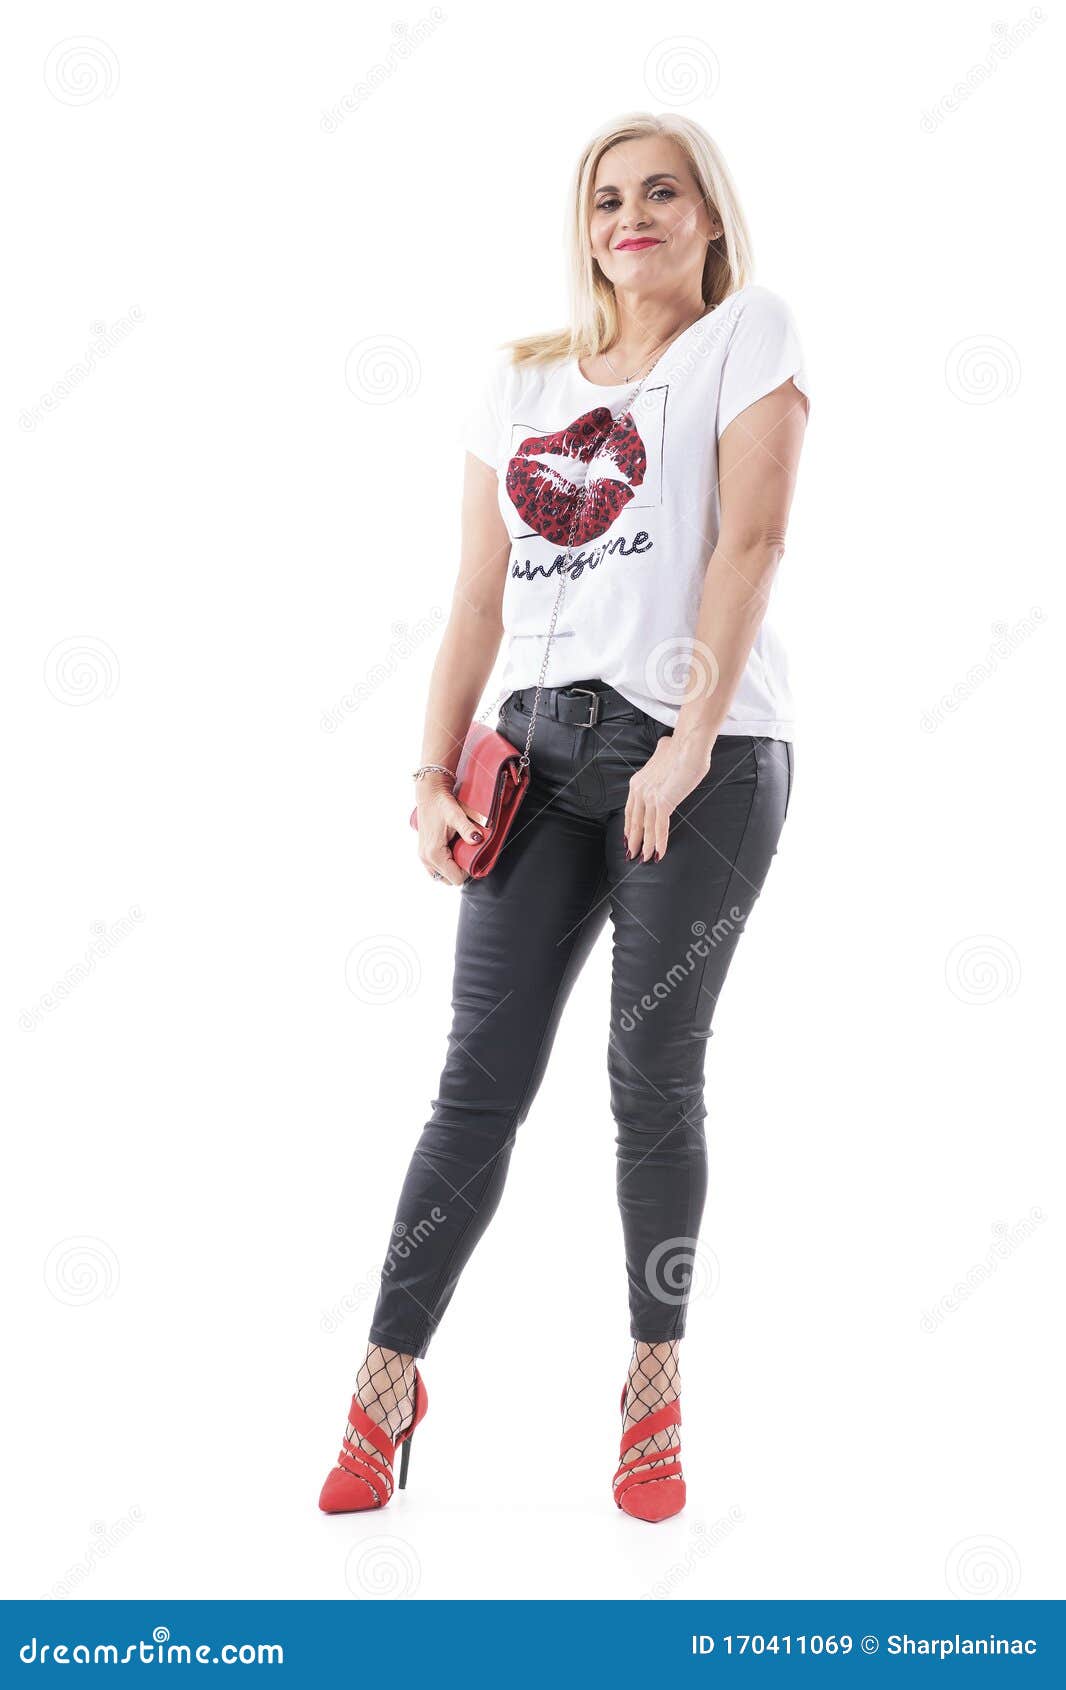 Confident Modern Style Middle Age Woman in Black Leather T-shirt and Red Shoes Stock Image - Image of blond, female: 170411069